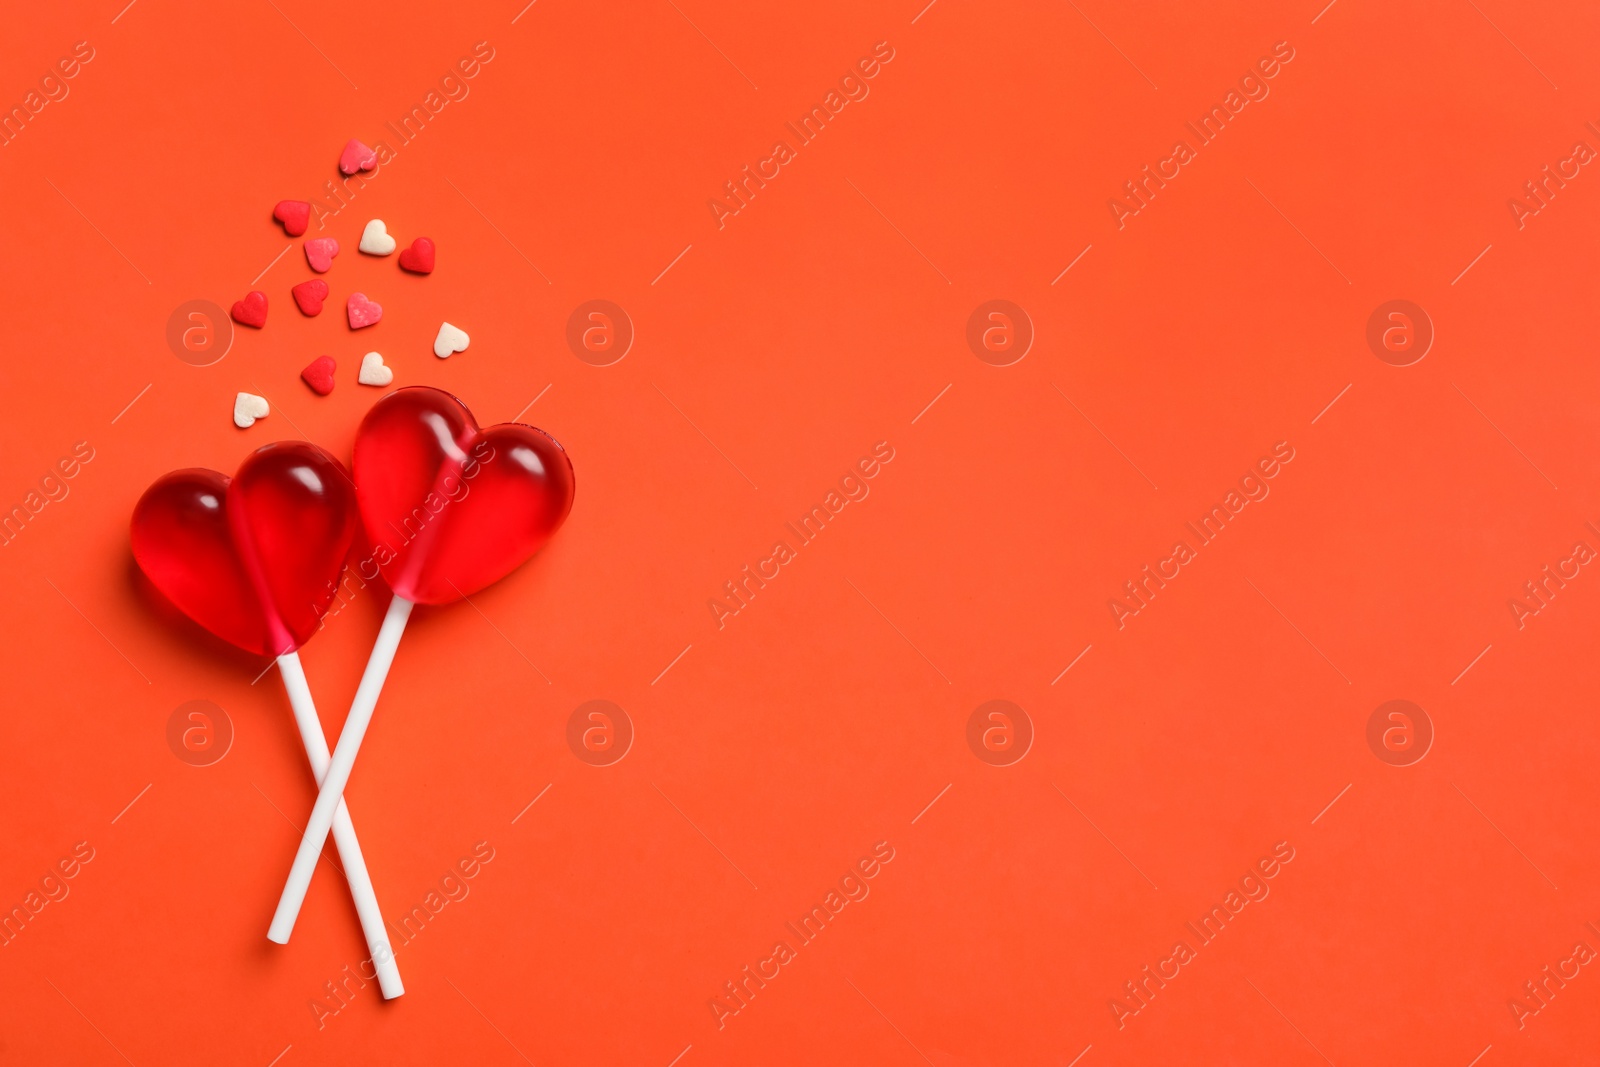 Photo of Sweet heart shaped lollipops and sprinkles on coral background, flat lay with space for text. Valentine's day celebration